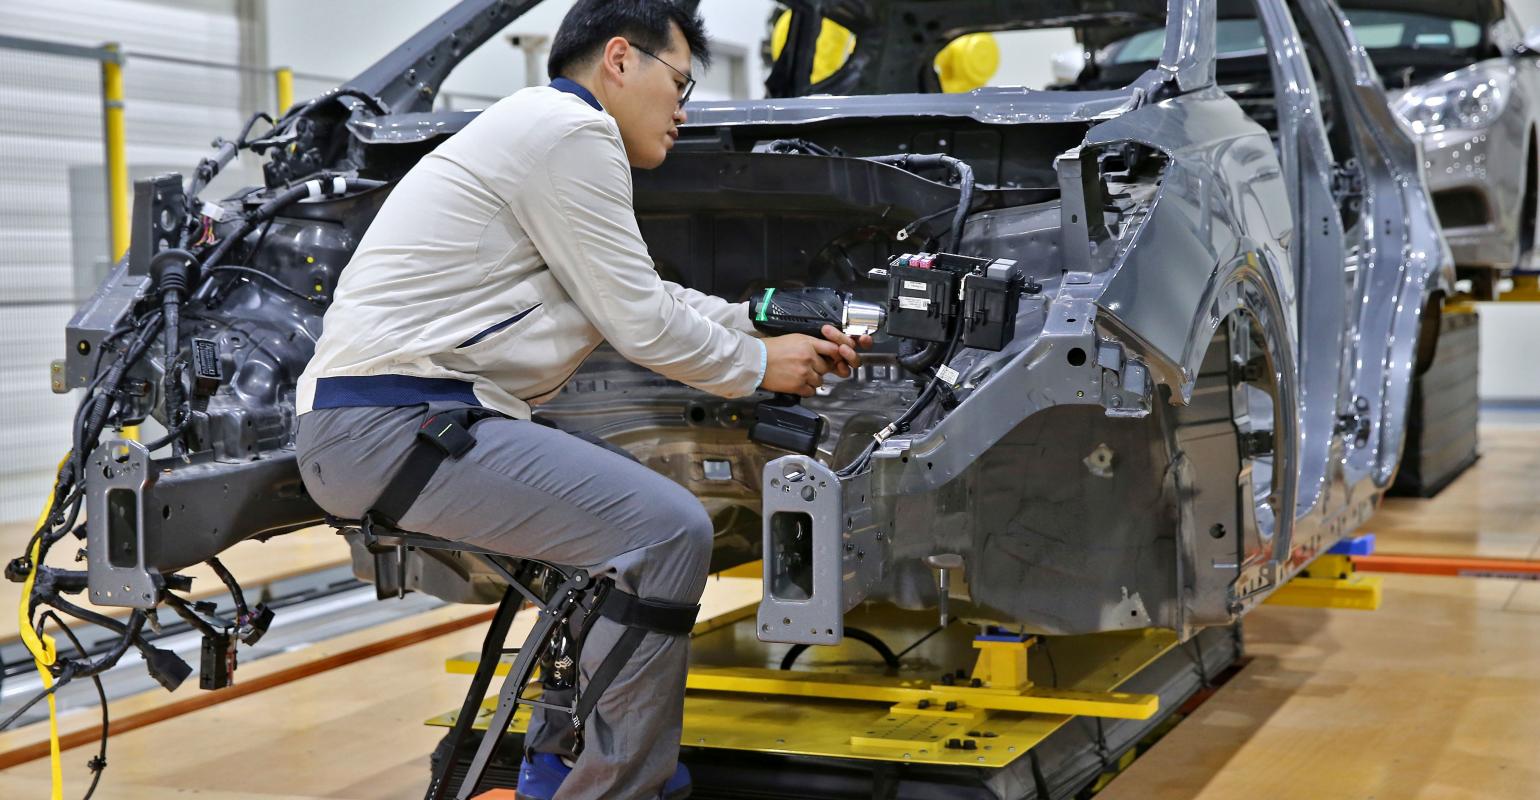 Hyundai’s Chairless Exoskeleton helps maintain worker’s sitting position.